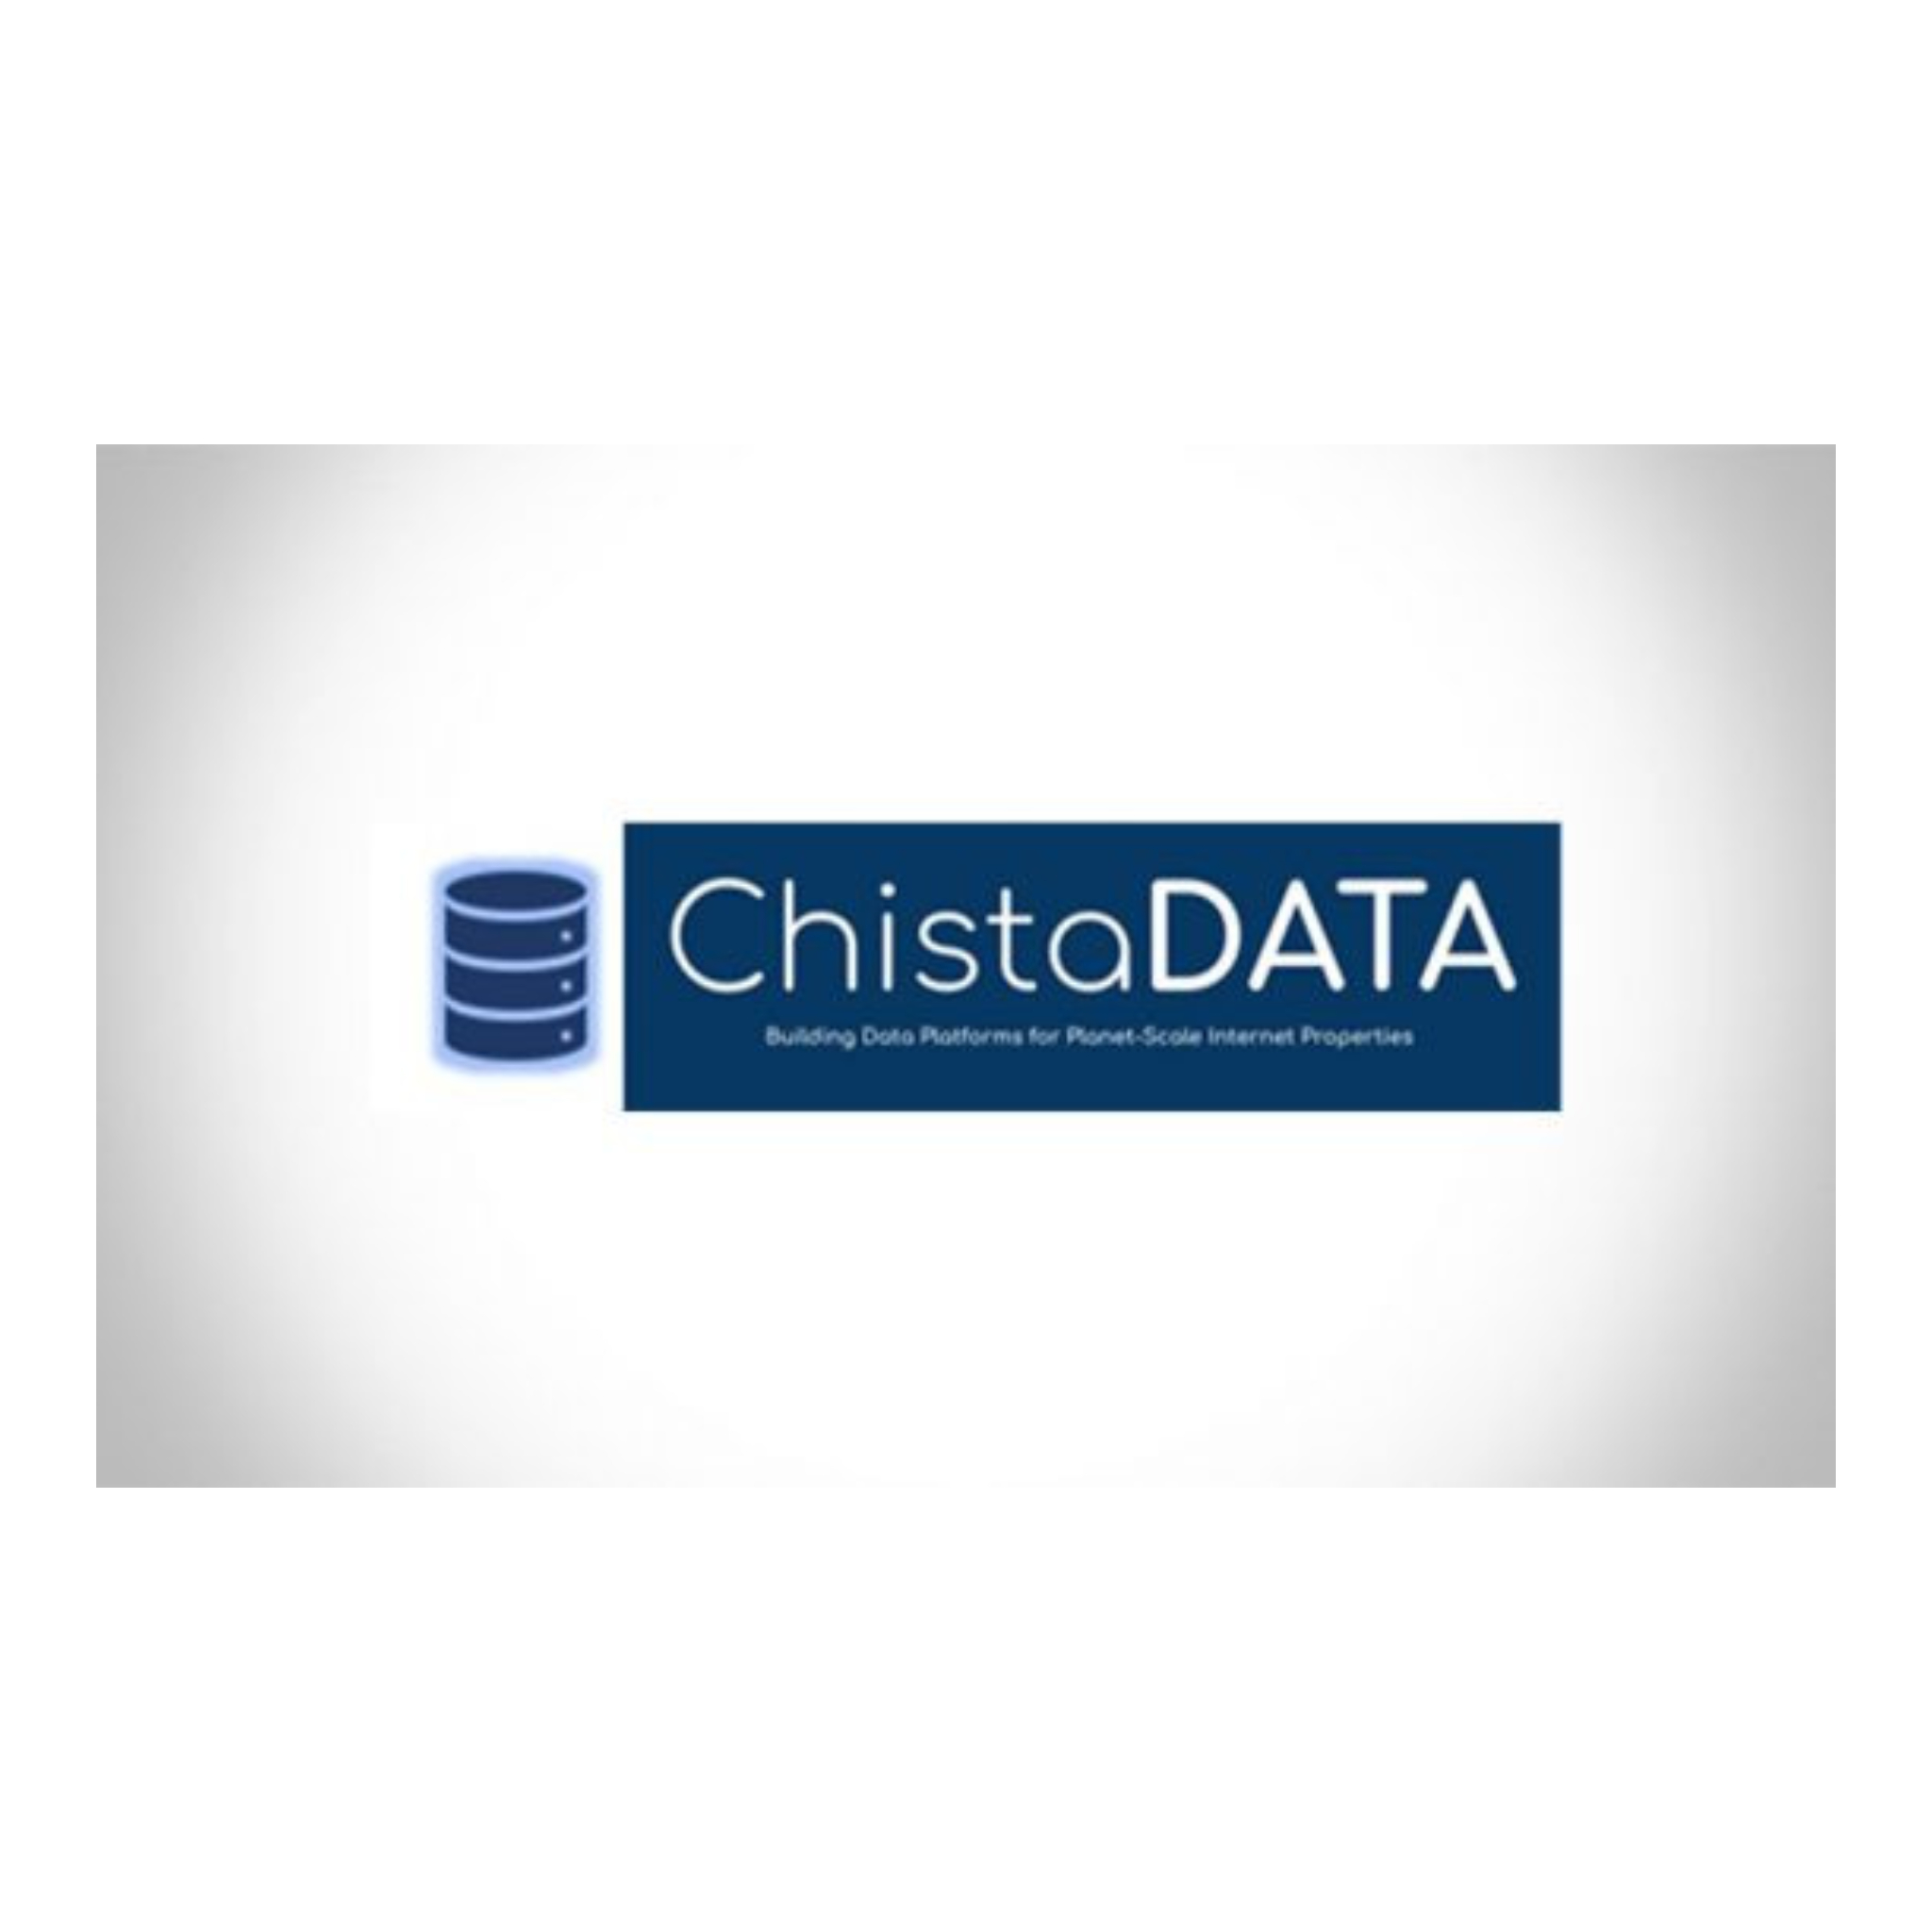 ClickHouse infrastructure provider ChistaDATA raises US$3m as it builds its open-source function-thumnail